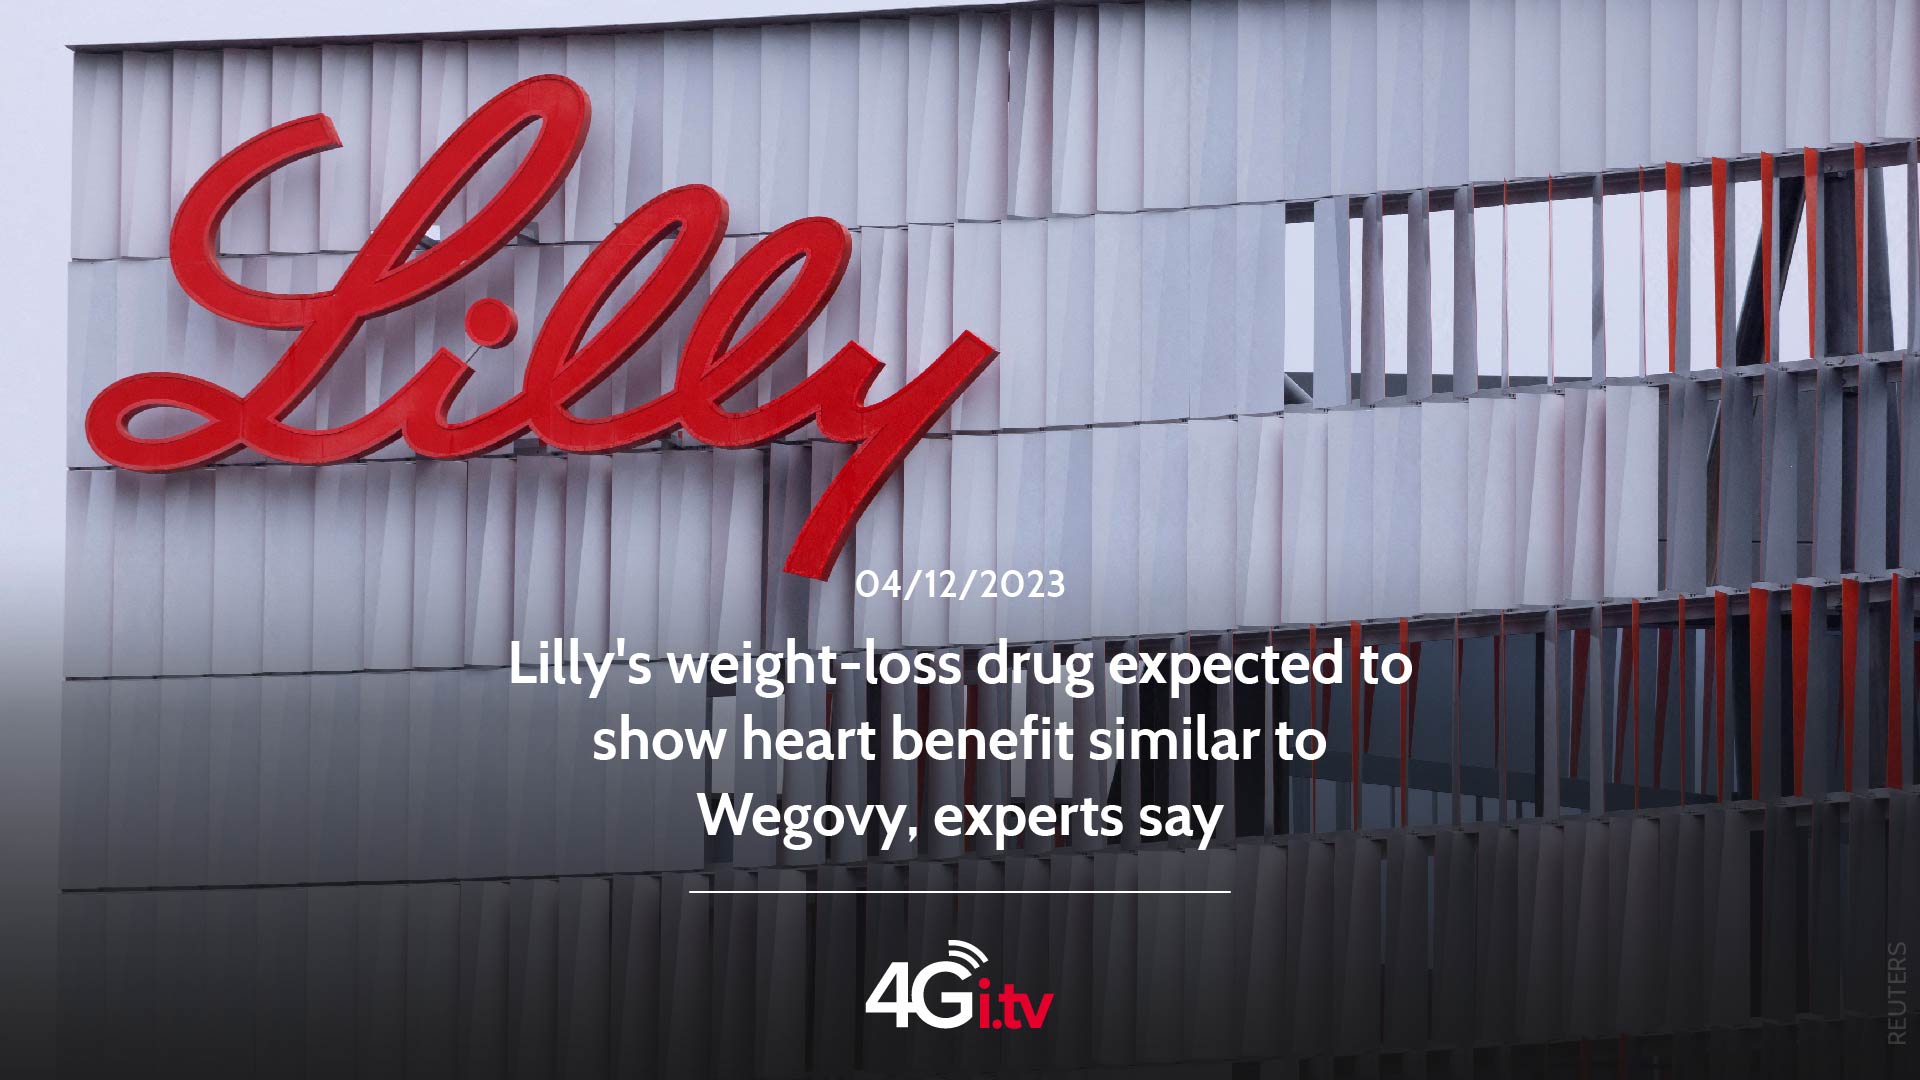 Подробнее о статье Lilly’s weight-loss drug expected to show heart benefit similar to Wegovy, experts say